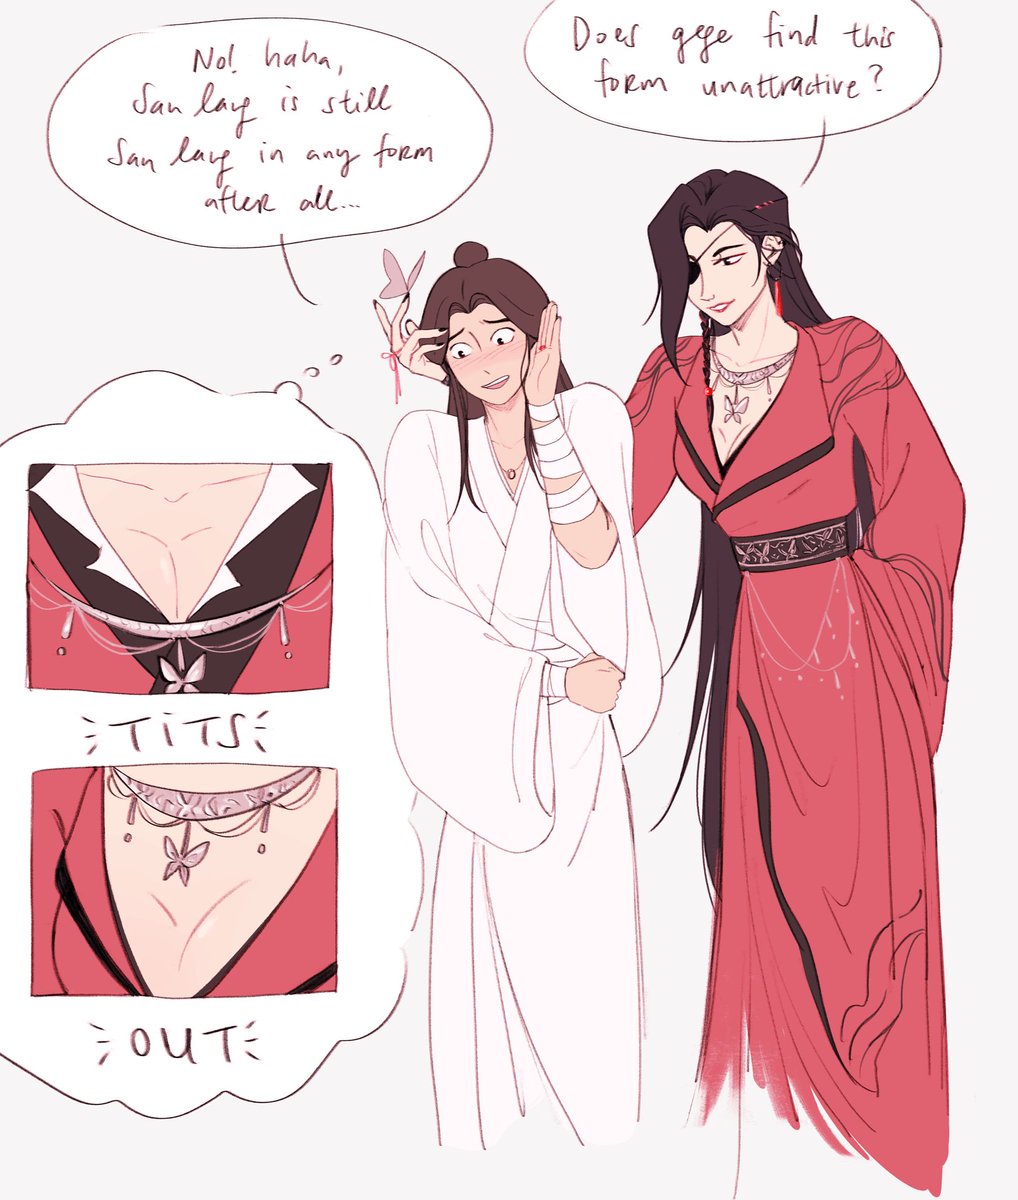 one thing about hua cheng never changes despite his shapeshifting 

https://t.co/dxfG5PdYZb 